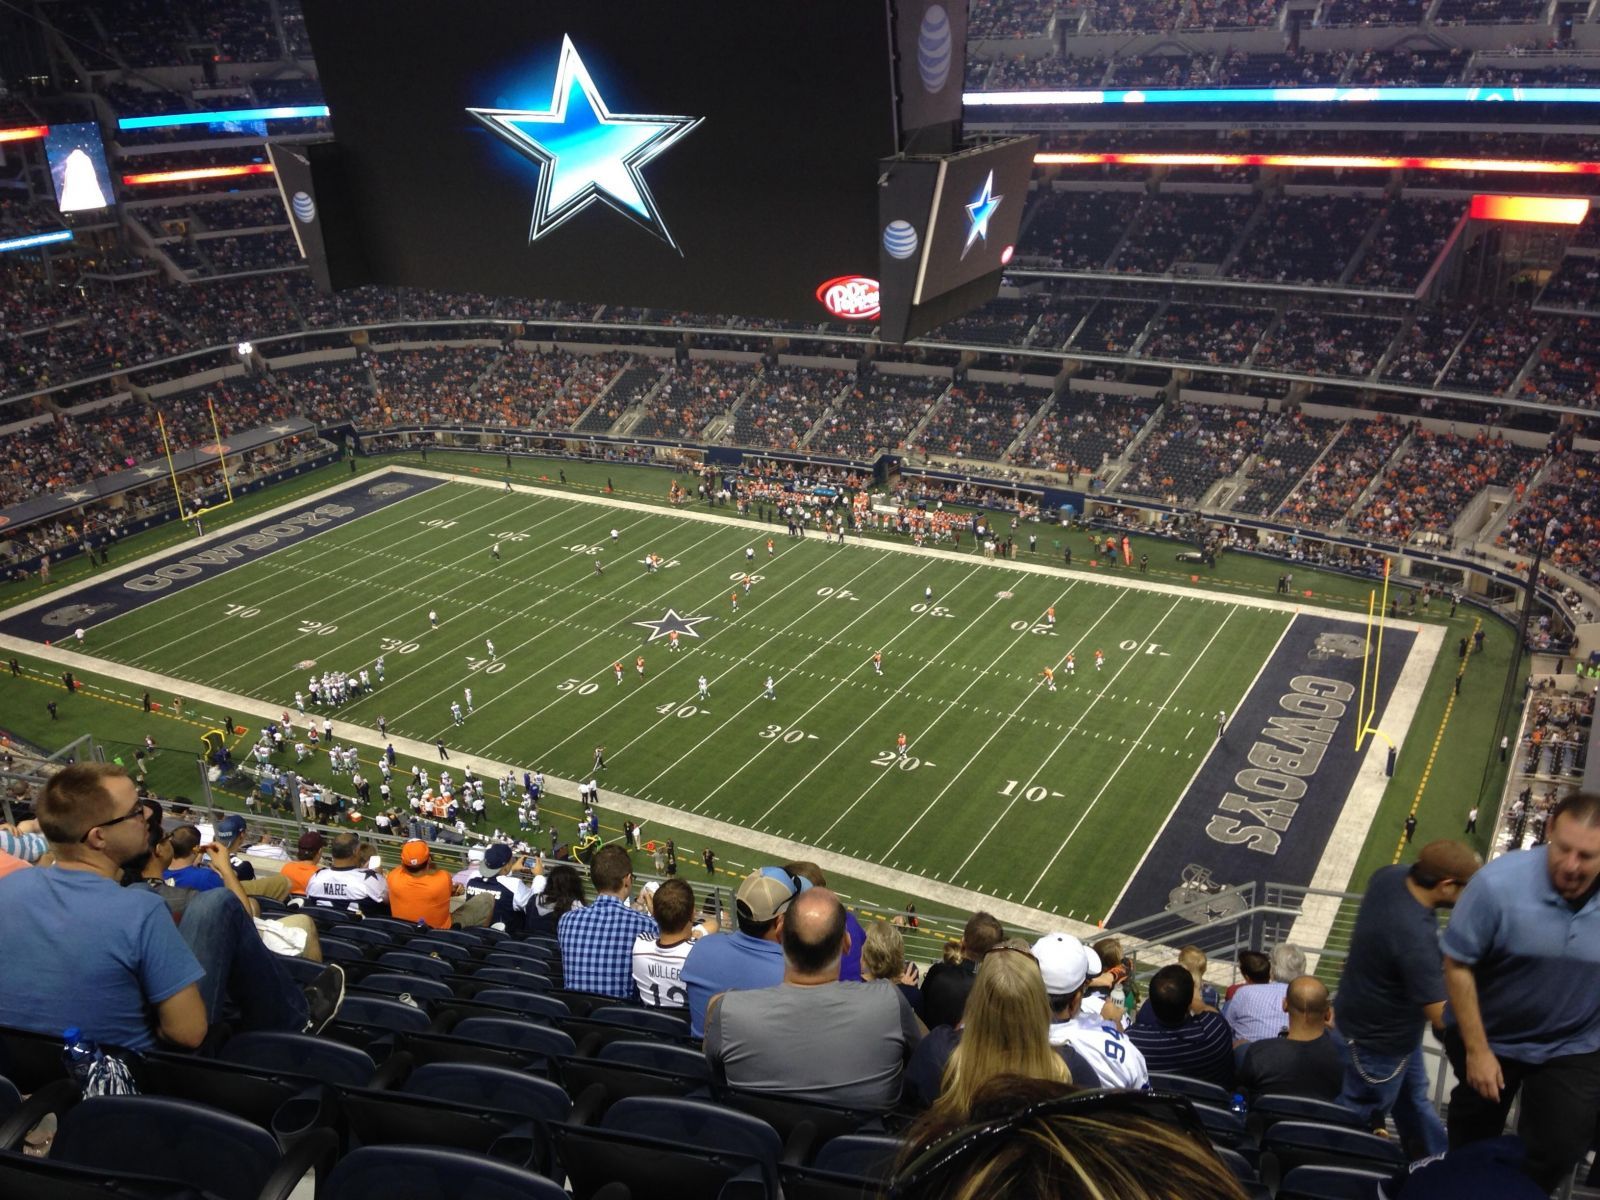 section 408, row 19 seat view  for football - at&t stadium (cowboys stadium)